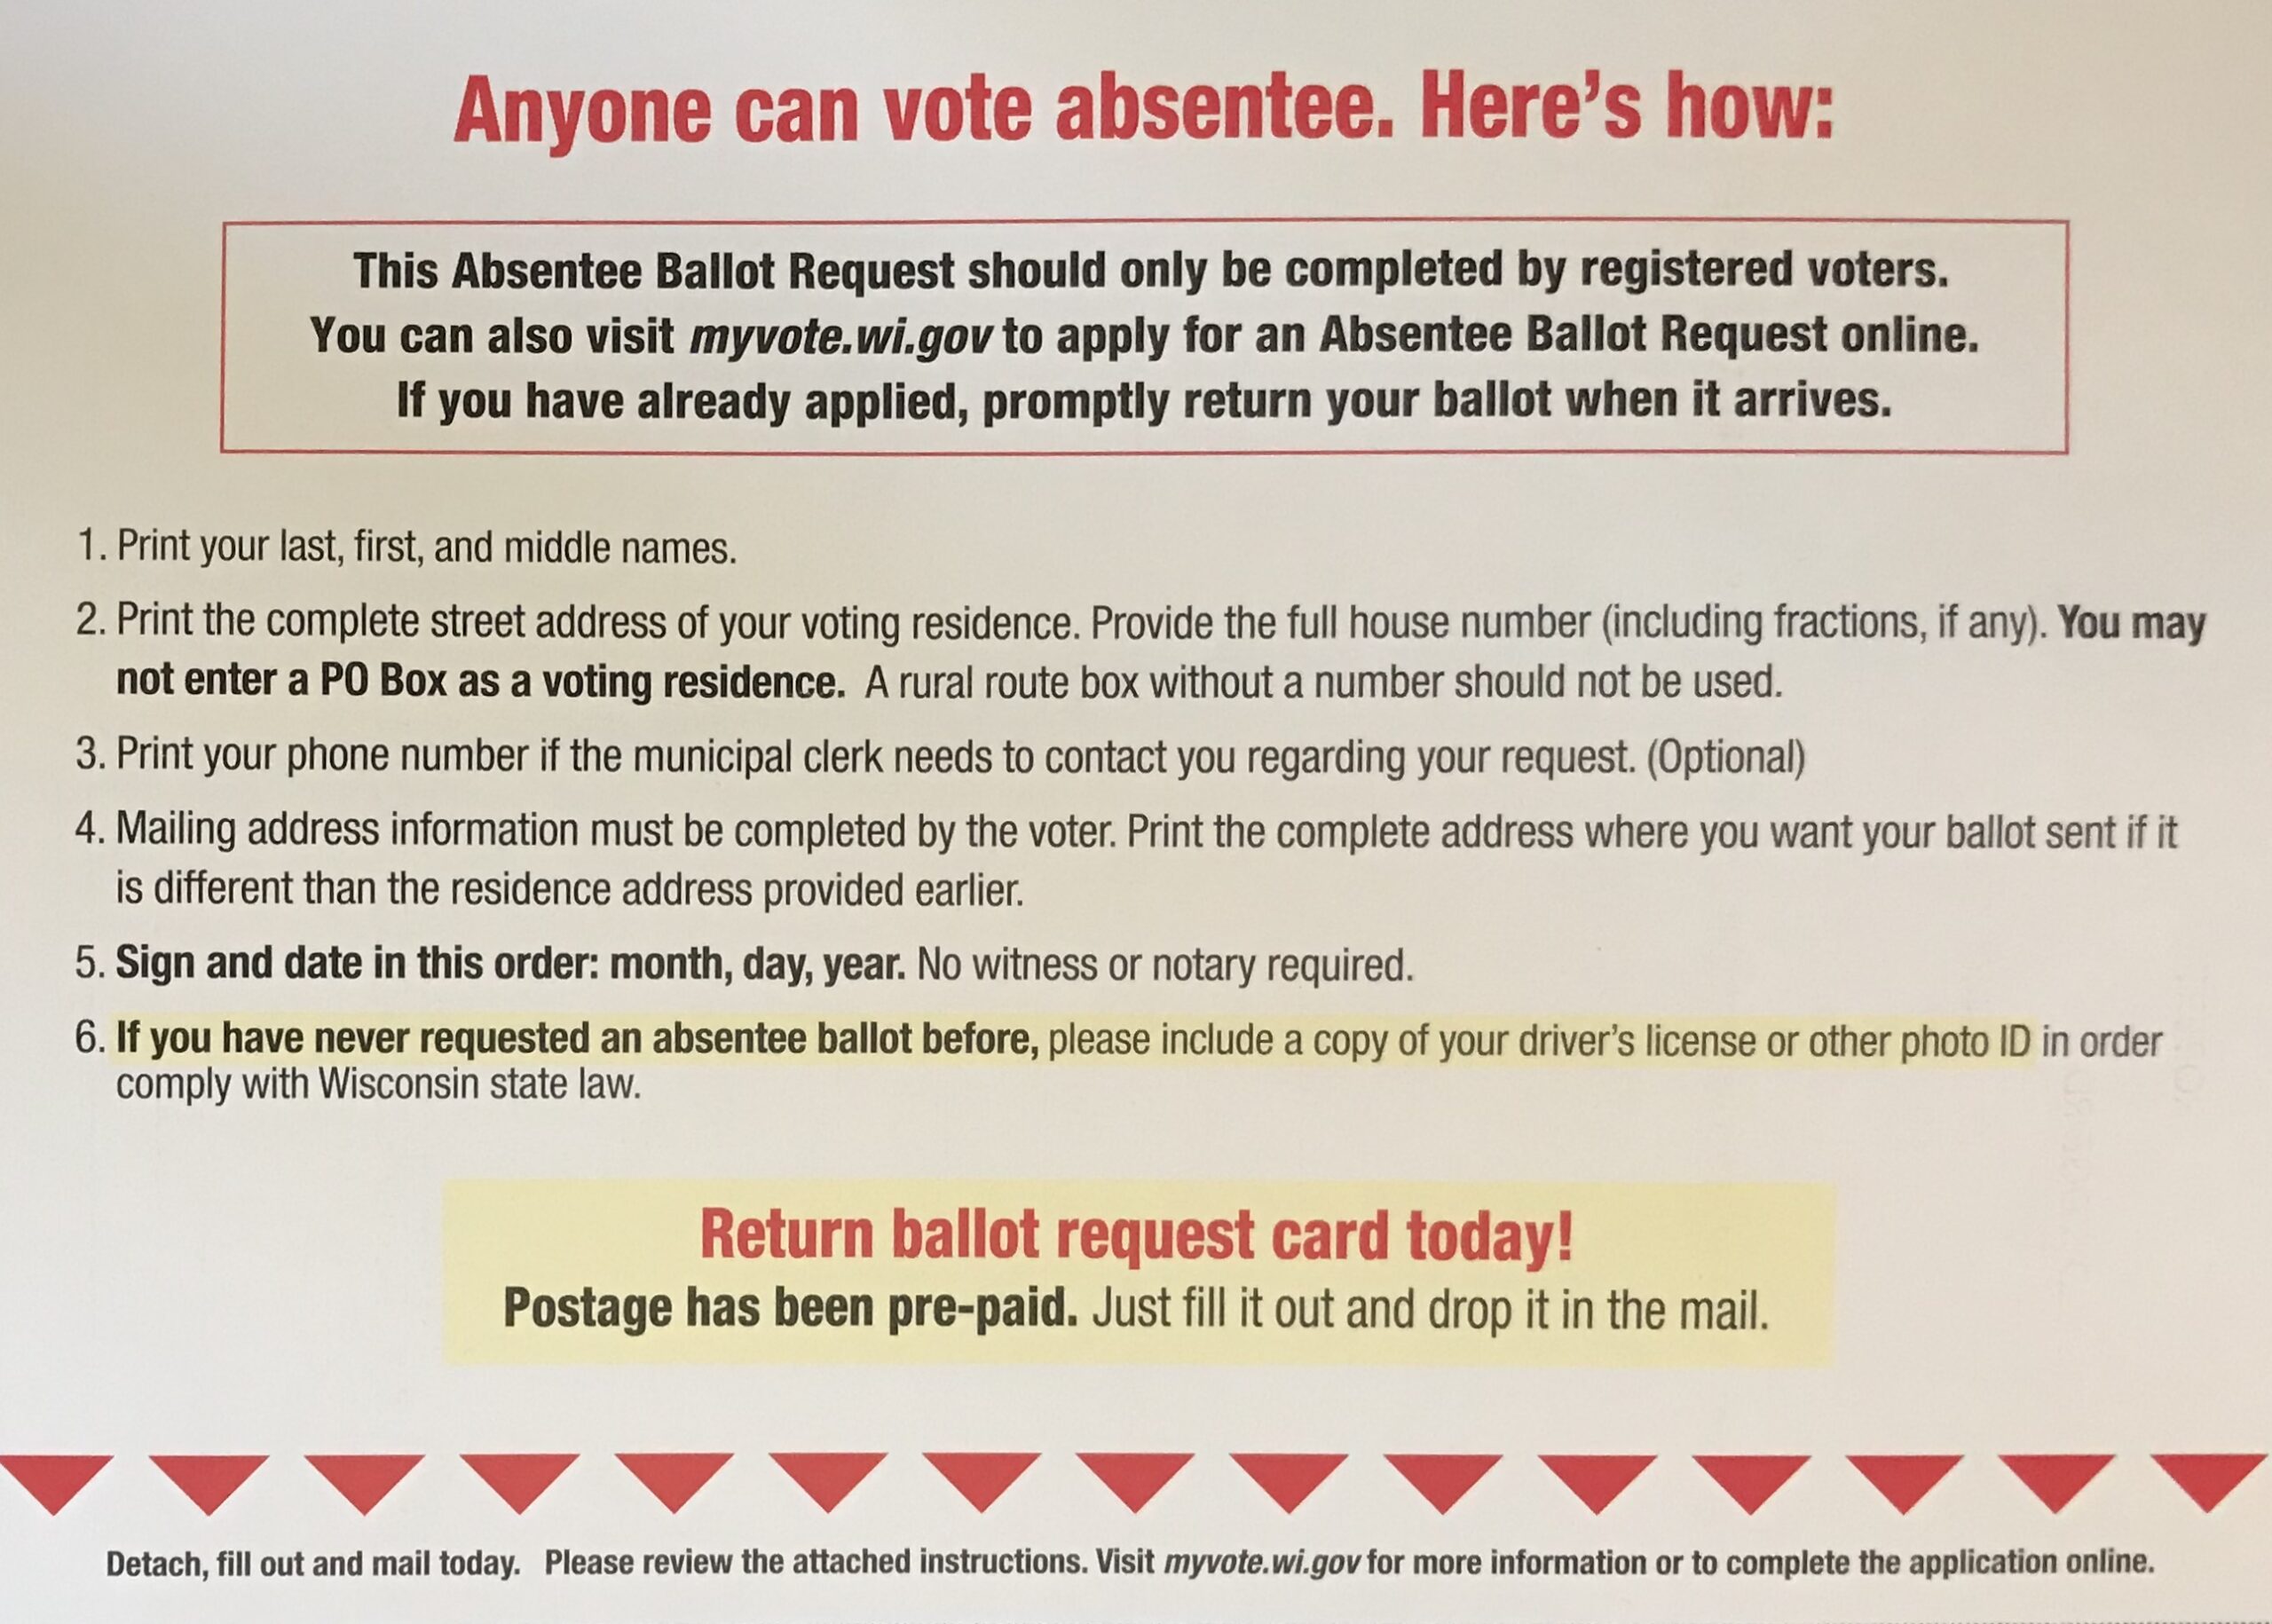 Instructions in mailer for voting absentee